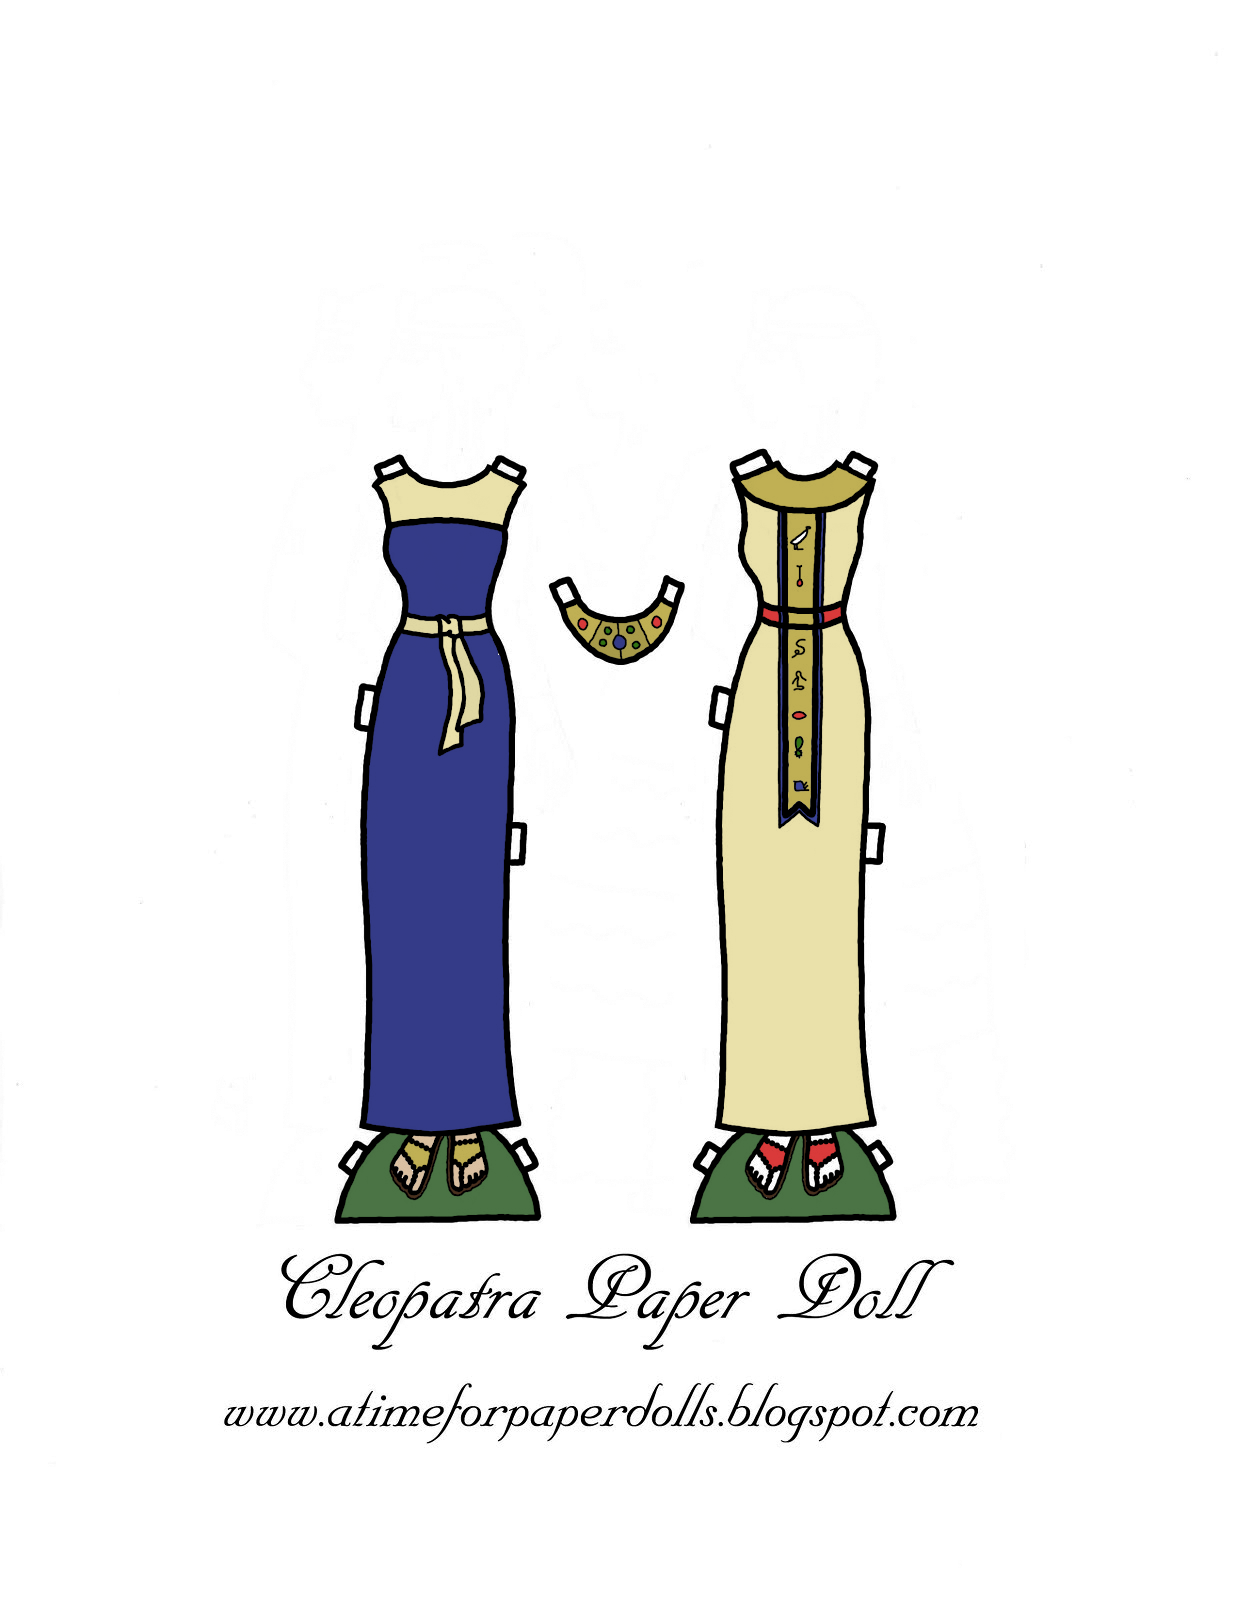 cleopatra-paper-doll-in-full-color-paper-thin-personas-paper-thin